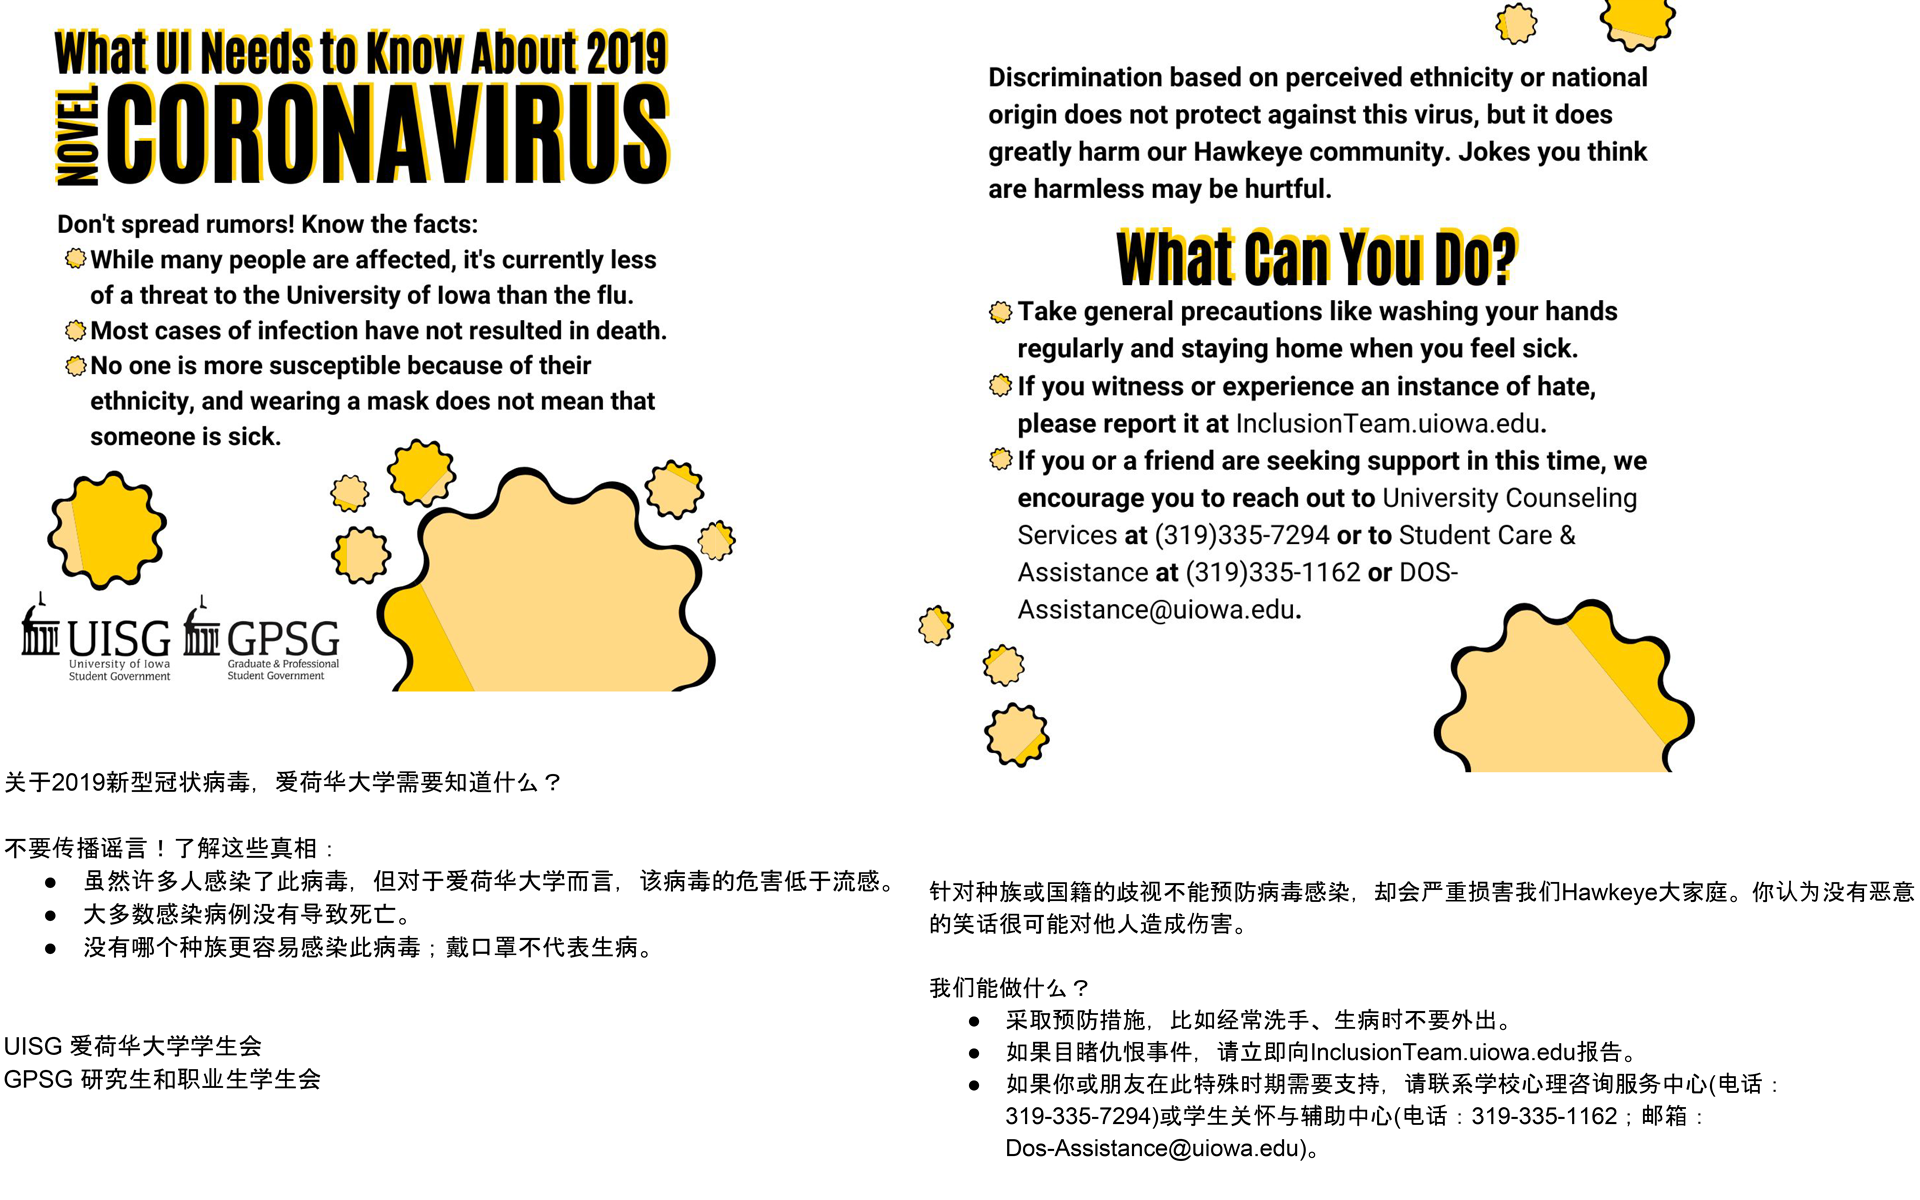 International Programs is working with UI student shared governance organizations to distribute the following information in both English and Chinese about the novel coronavirus: